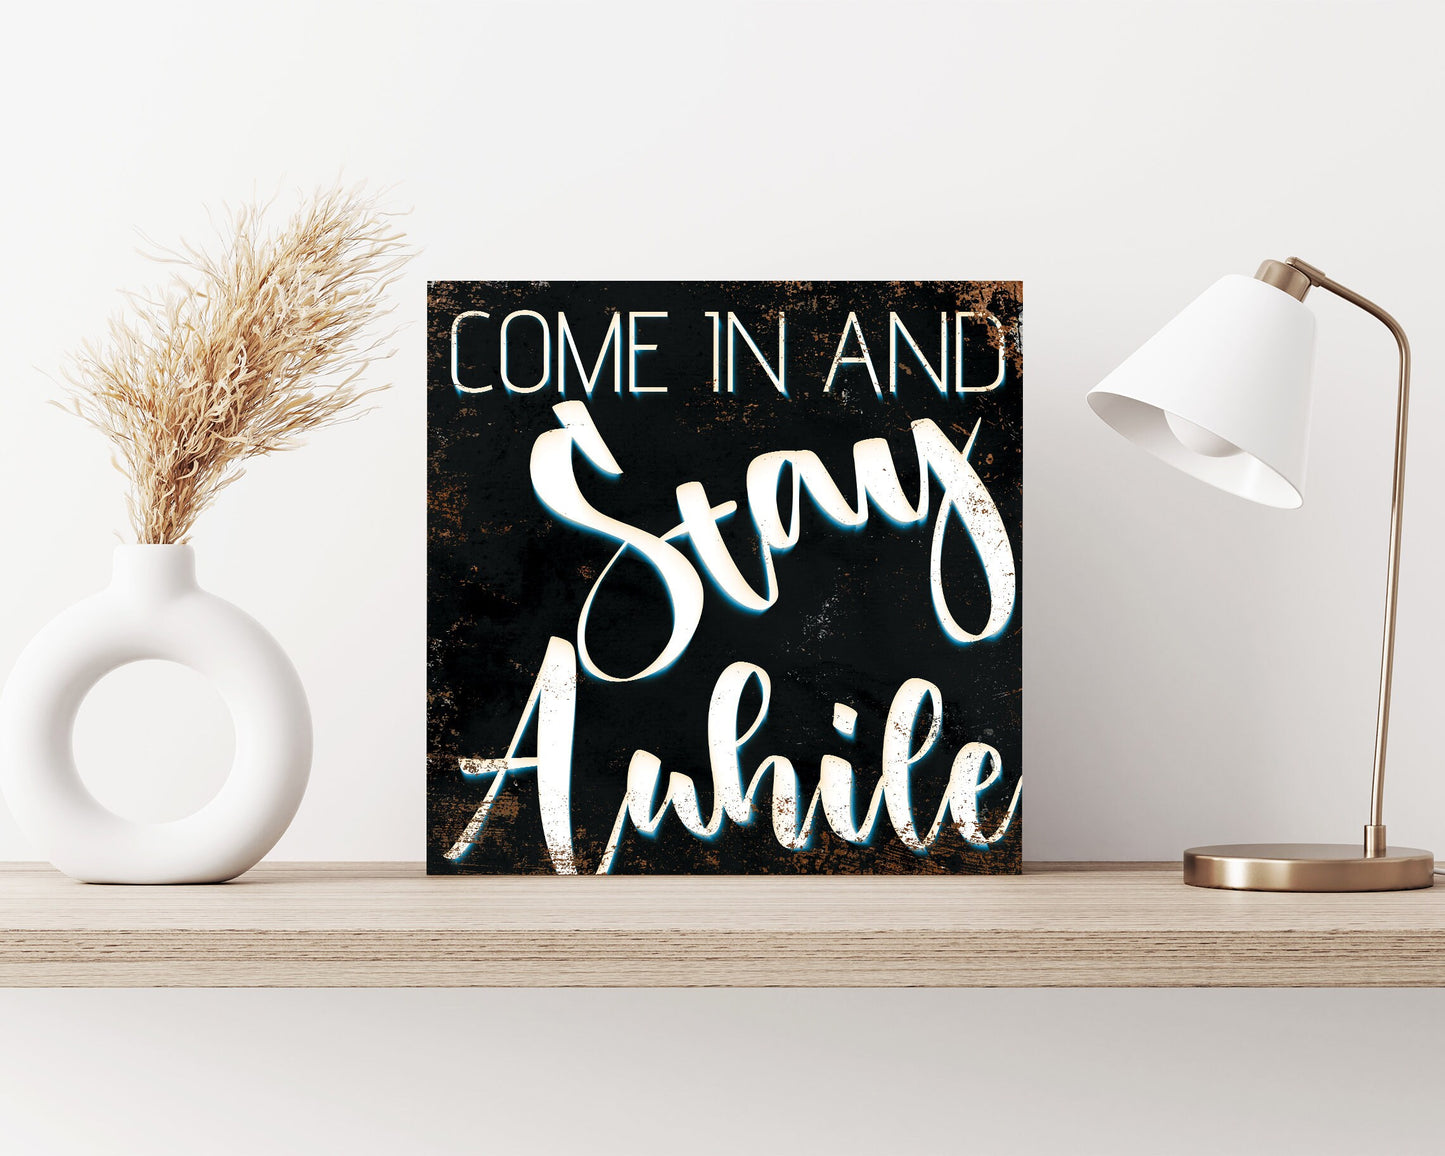 12in 'Come In And stay awhile' Modern Farmhouse Canvas Wall Art, Wall Canvas Printing, Living Room Decor